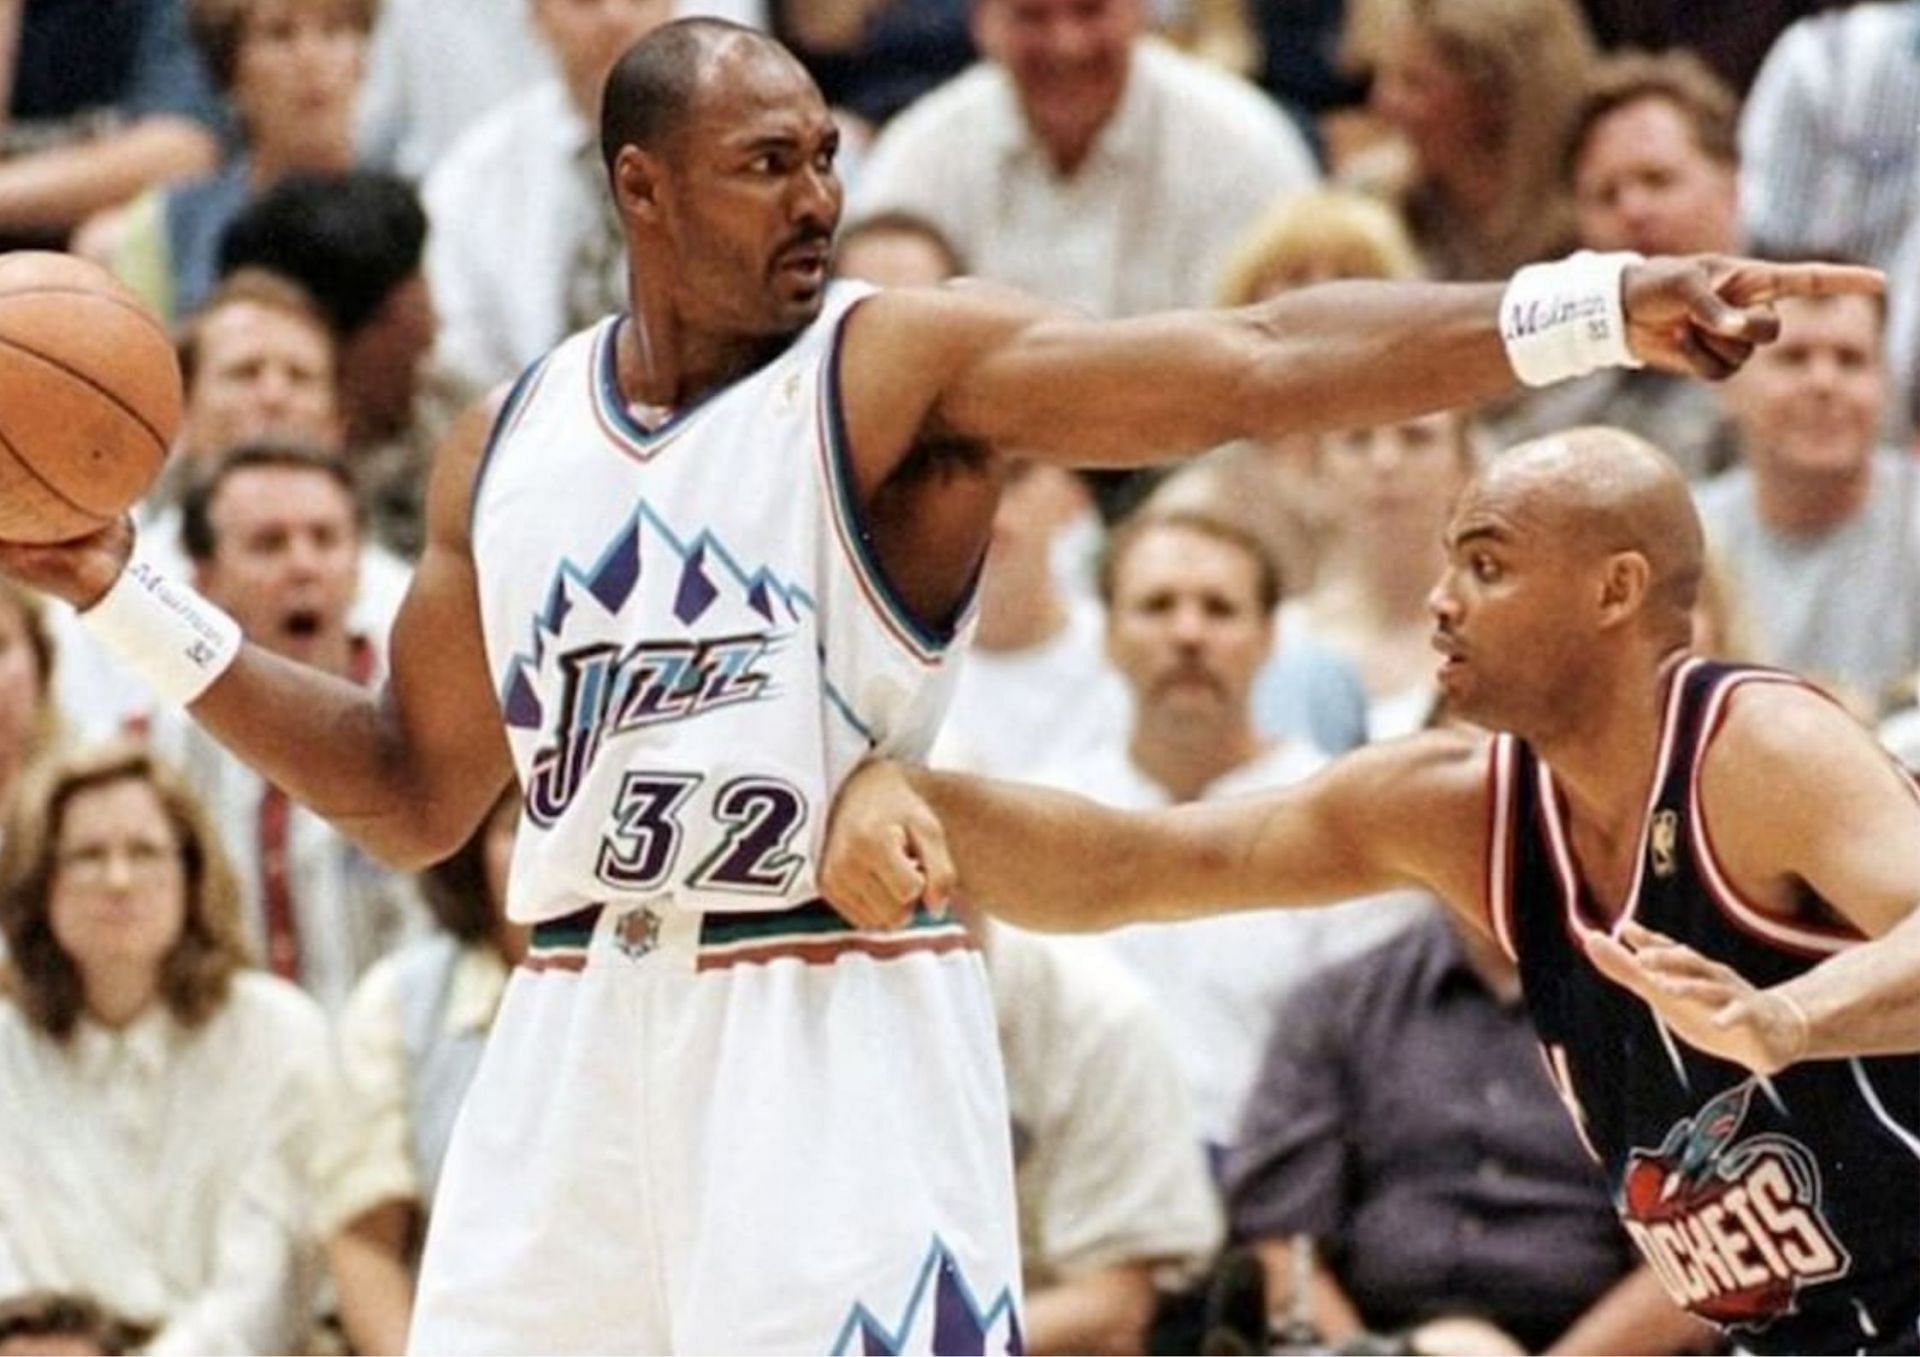 Karl Malone and Charles Barkley rank first and second in most technical fouls in NBA history. [photo: Basketball Network]